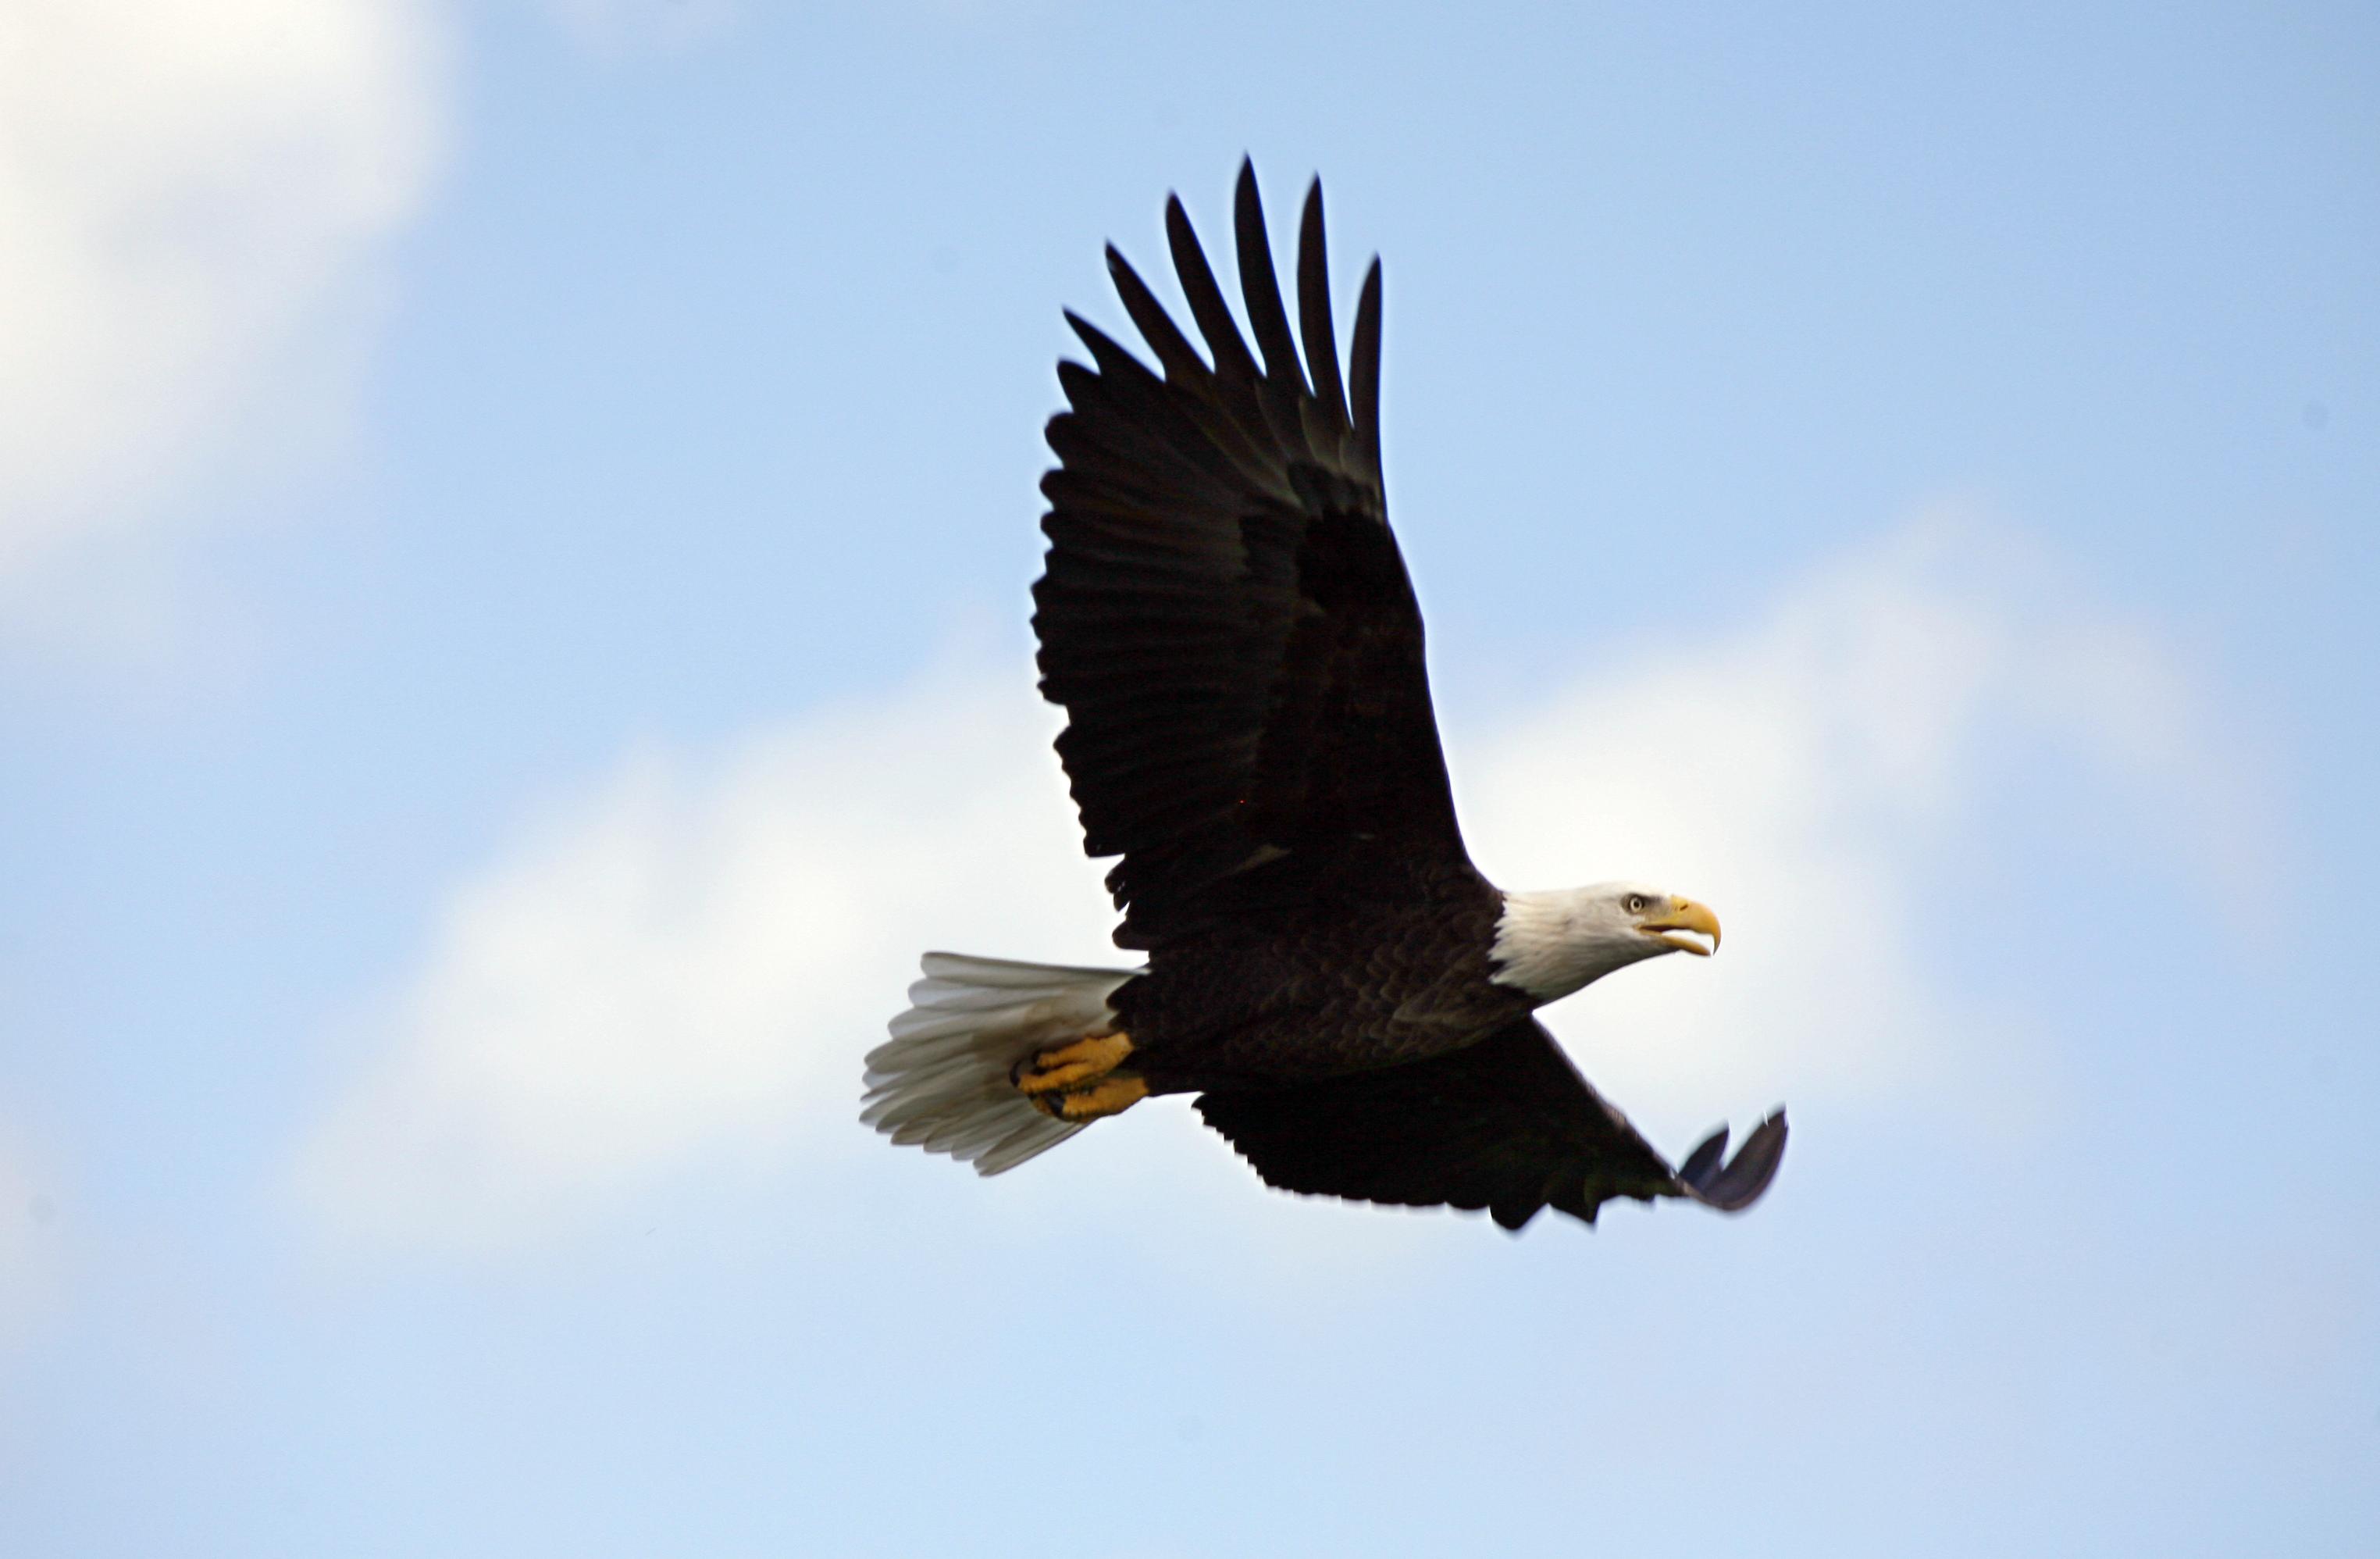 This large picture shows a close-up of a bald eagle in flight. The bird flies to the right and the wings are just fully spread. The eyes look forward, the beak is slightly open, the powerful legs and claws are stretched backwards. The bird is seen against a blue sky with a few hazy white clouds. There is a very small spot of red light shining on the underside of the right wing.